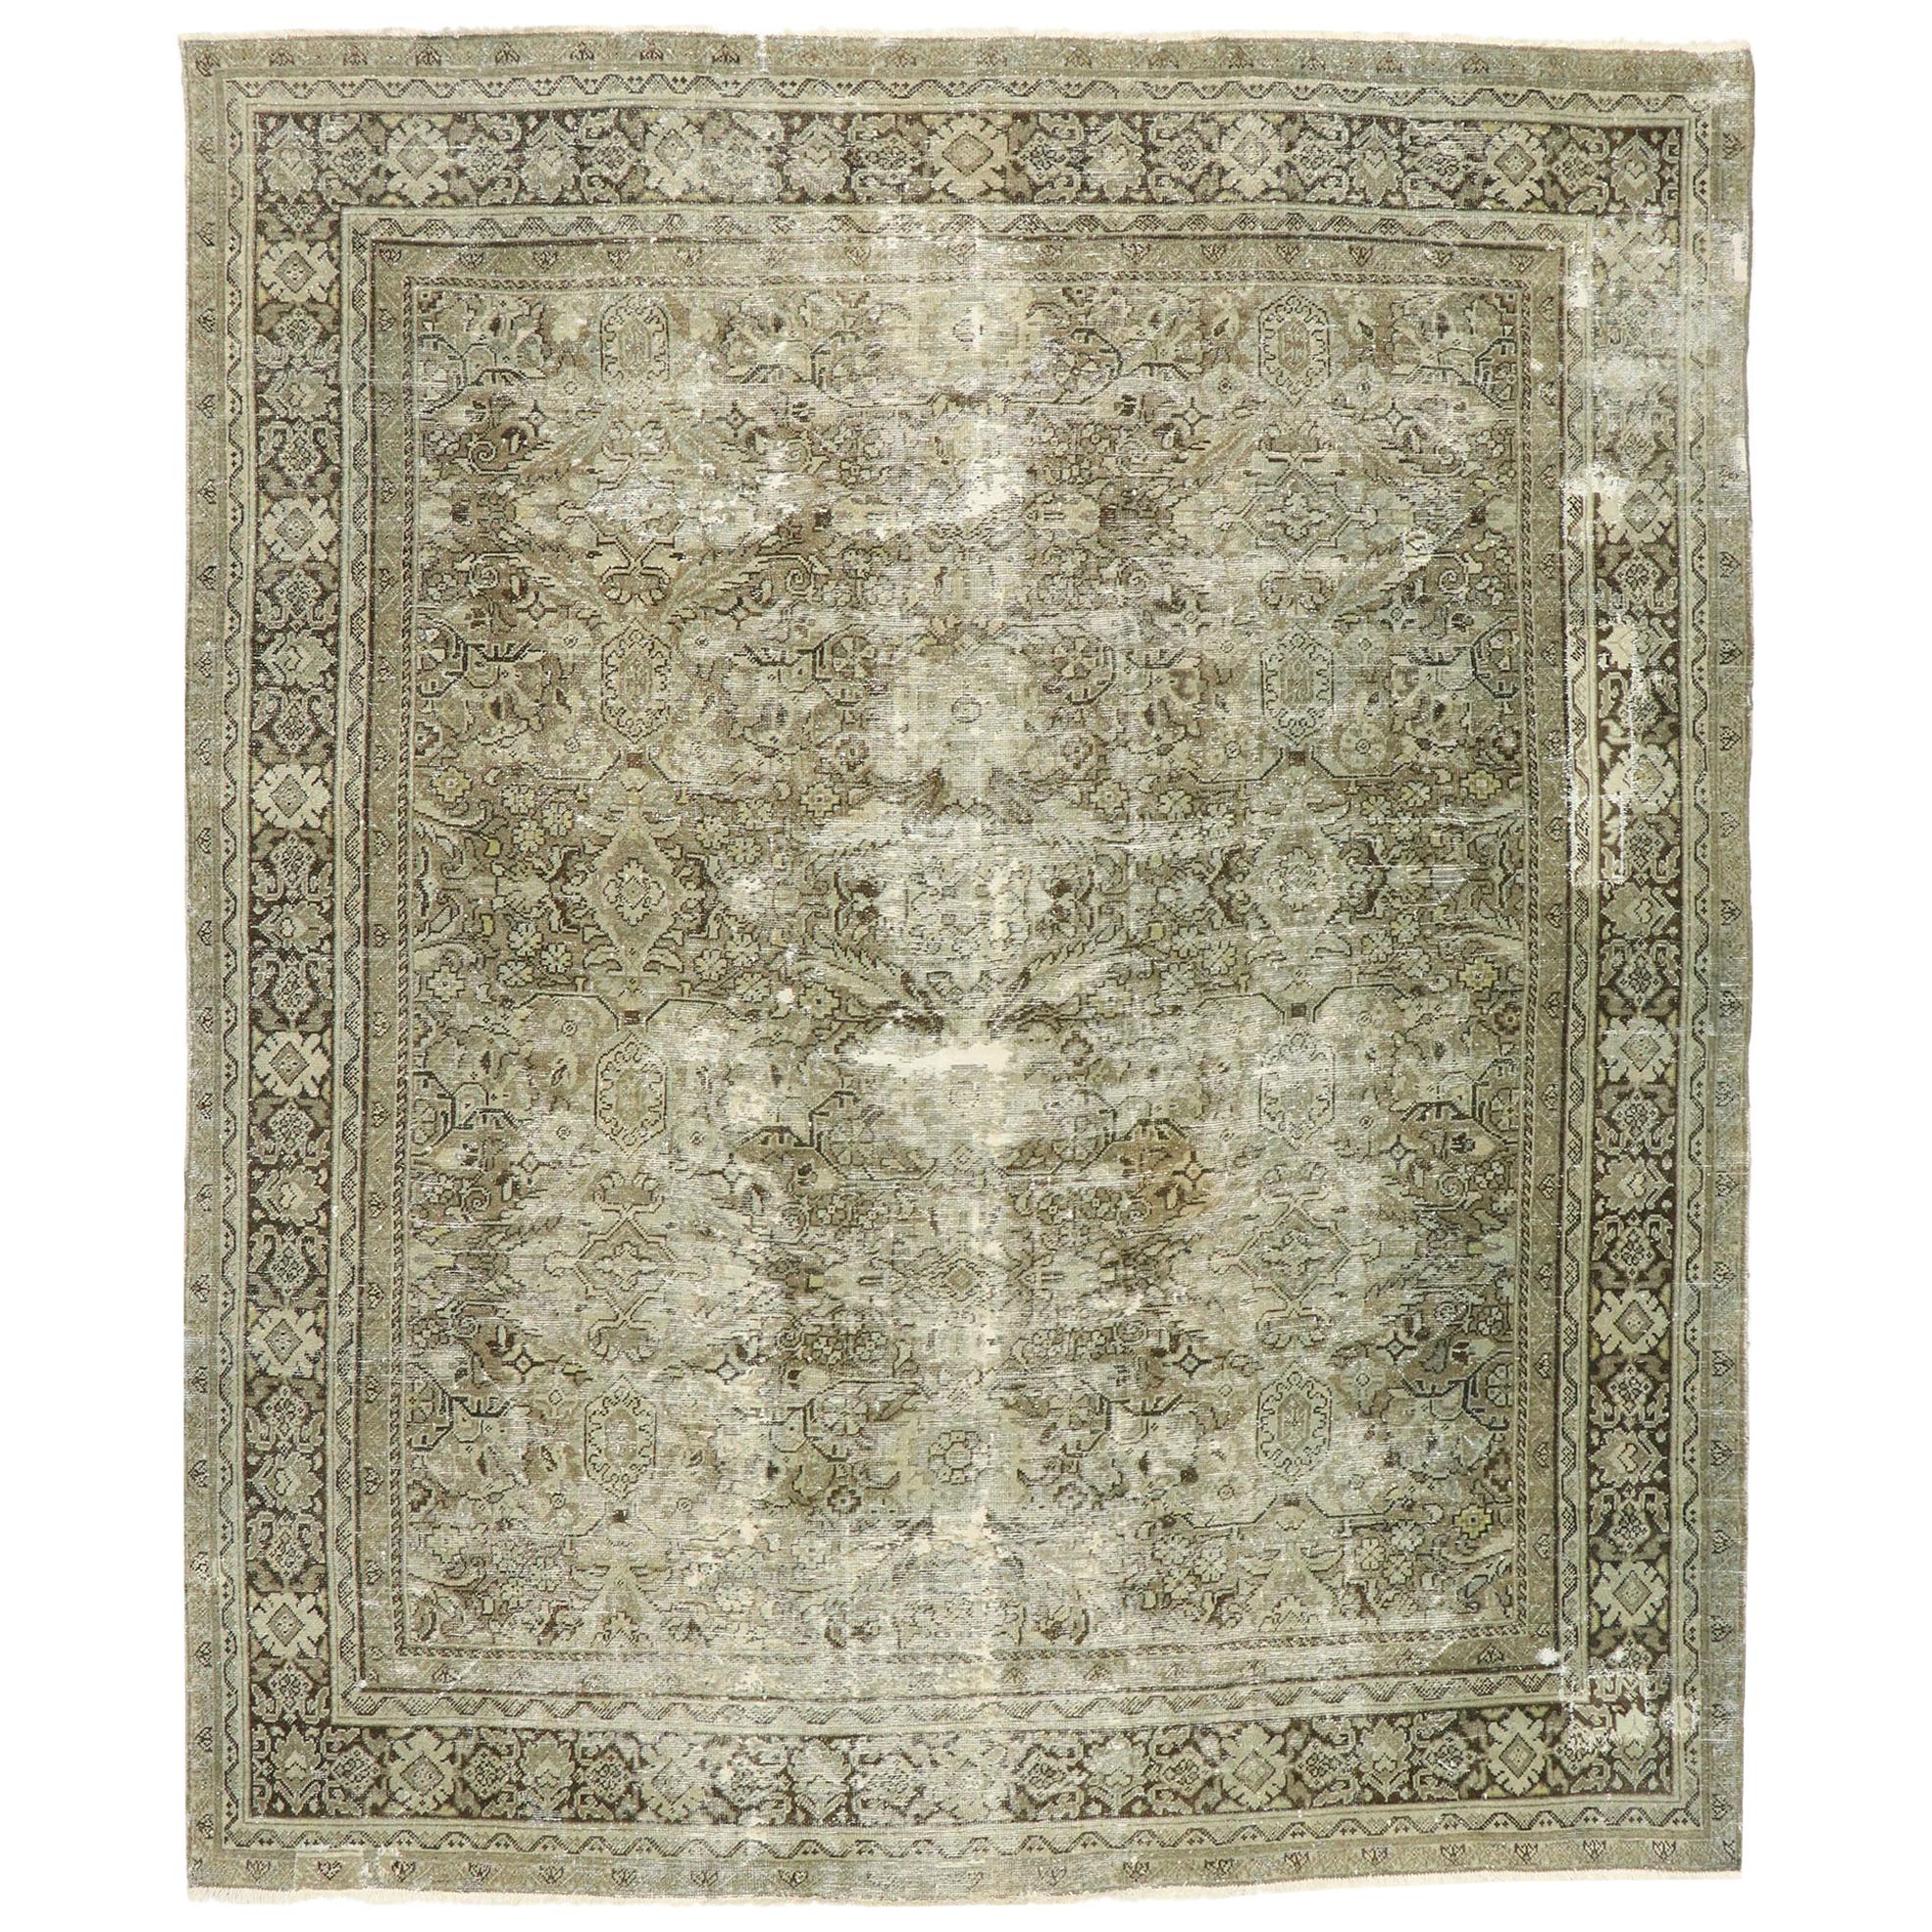 Antique-Worn Persian Mahal Rug, Relaxed Refinement Meets Earth-Tone Elegance